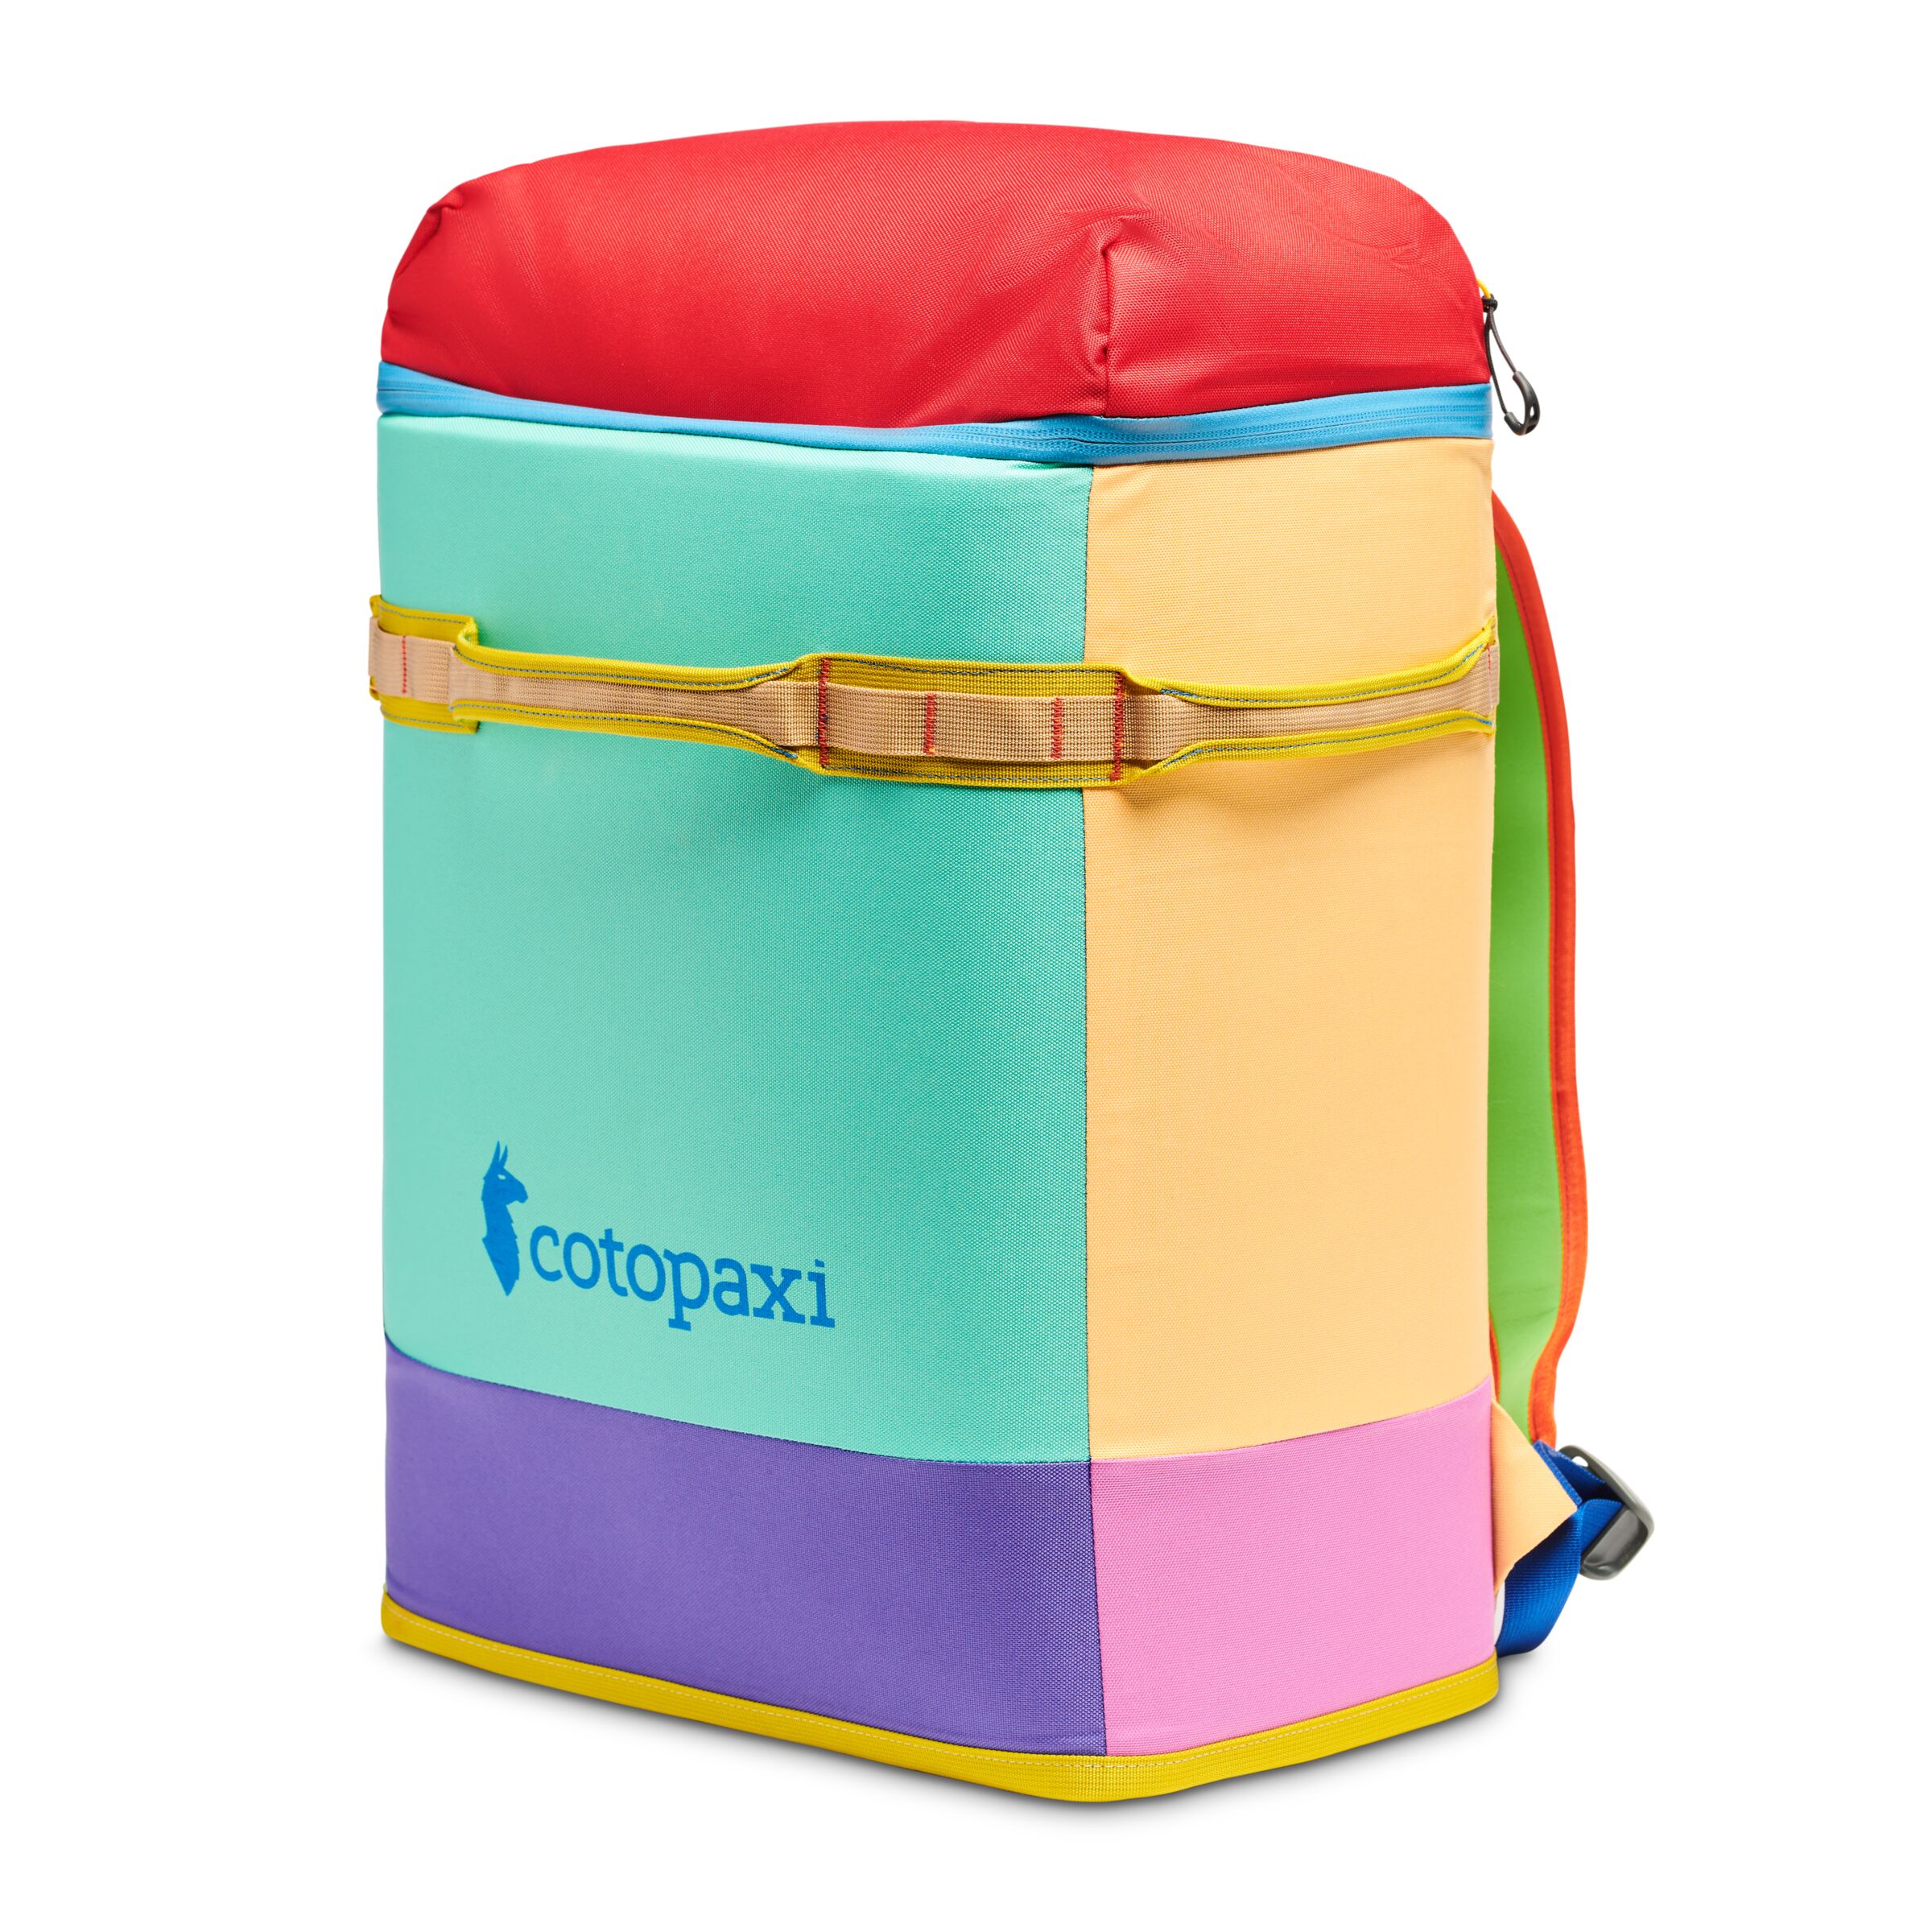 Cotopaxi Hielo 24L Cooler Backpack CB-24-F22-DD with Free S&H